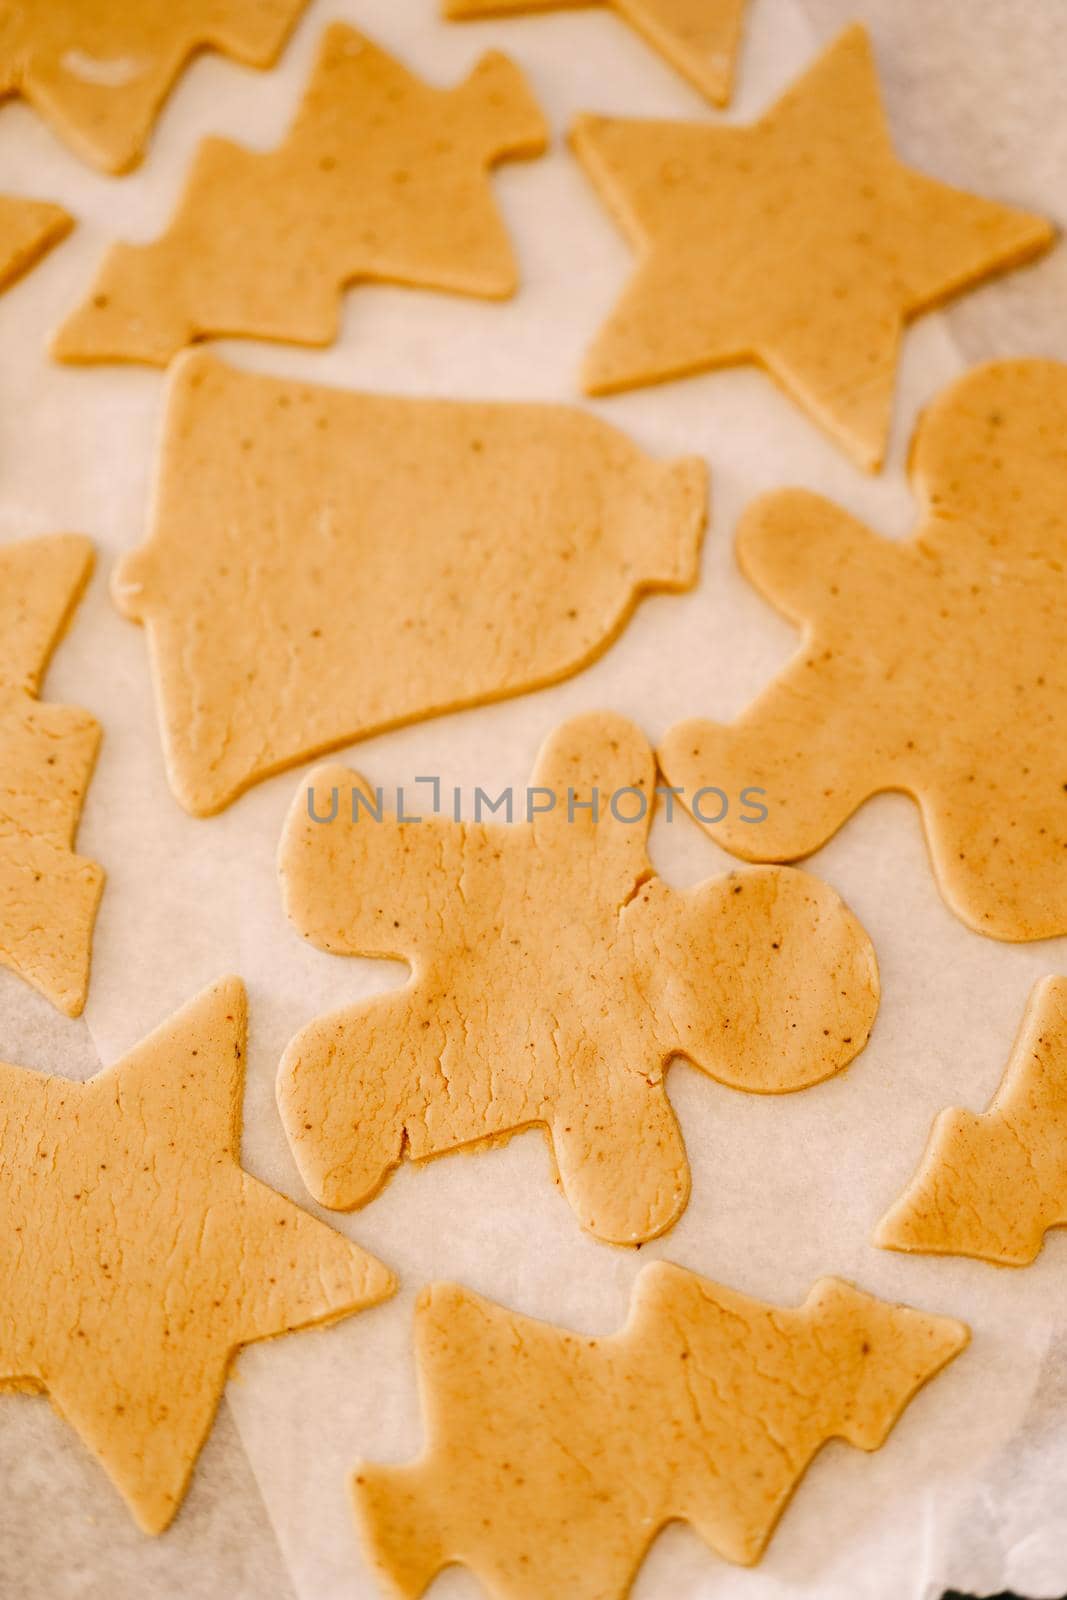 Process of making homemade cookies or gingerbread in different forms. Raw dough cookies lie on a baking sheet covered with parchment for baking before being sent to the oven. Close up by Nadtochiy